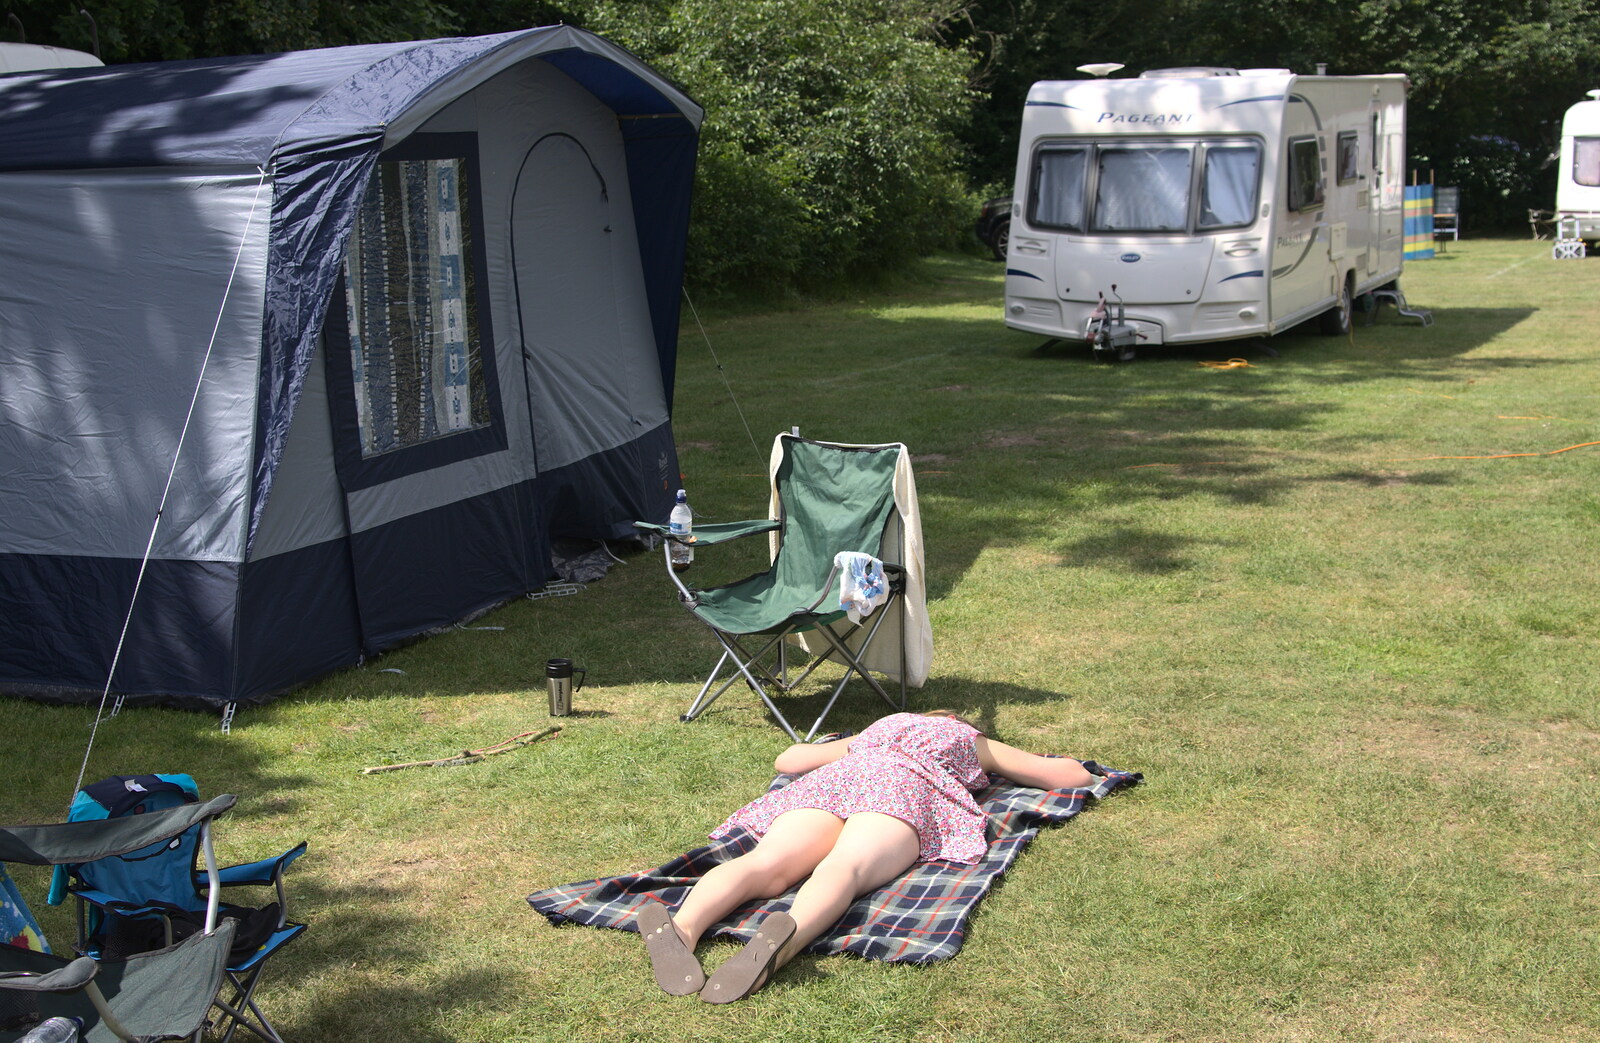 Isobel gets some sun from A Weekend in the Camper Van, West Harling, Norfolk - 21st June 2014